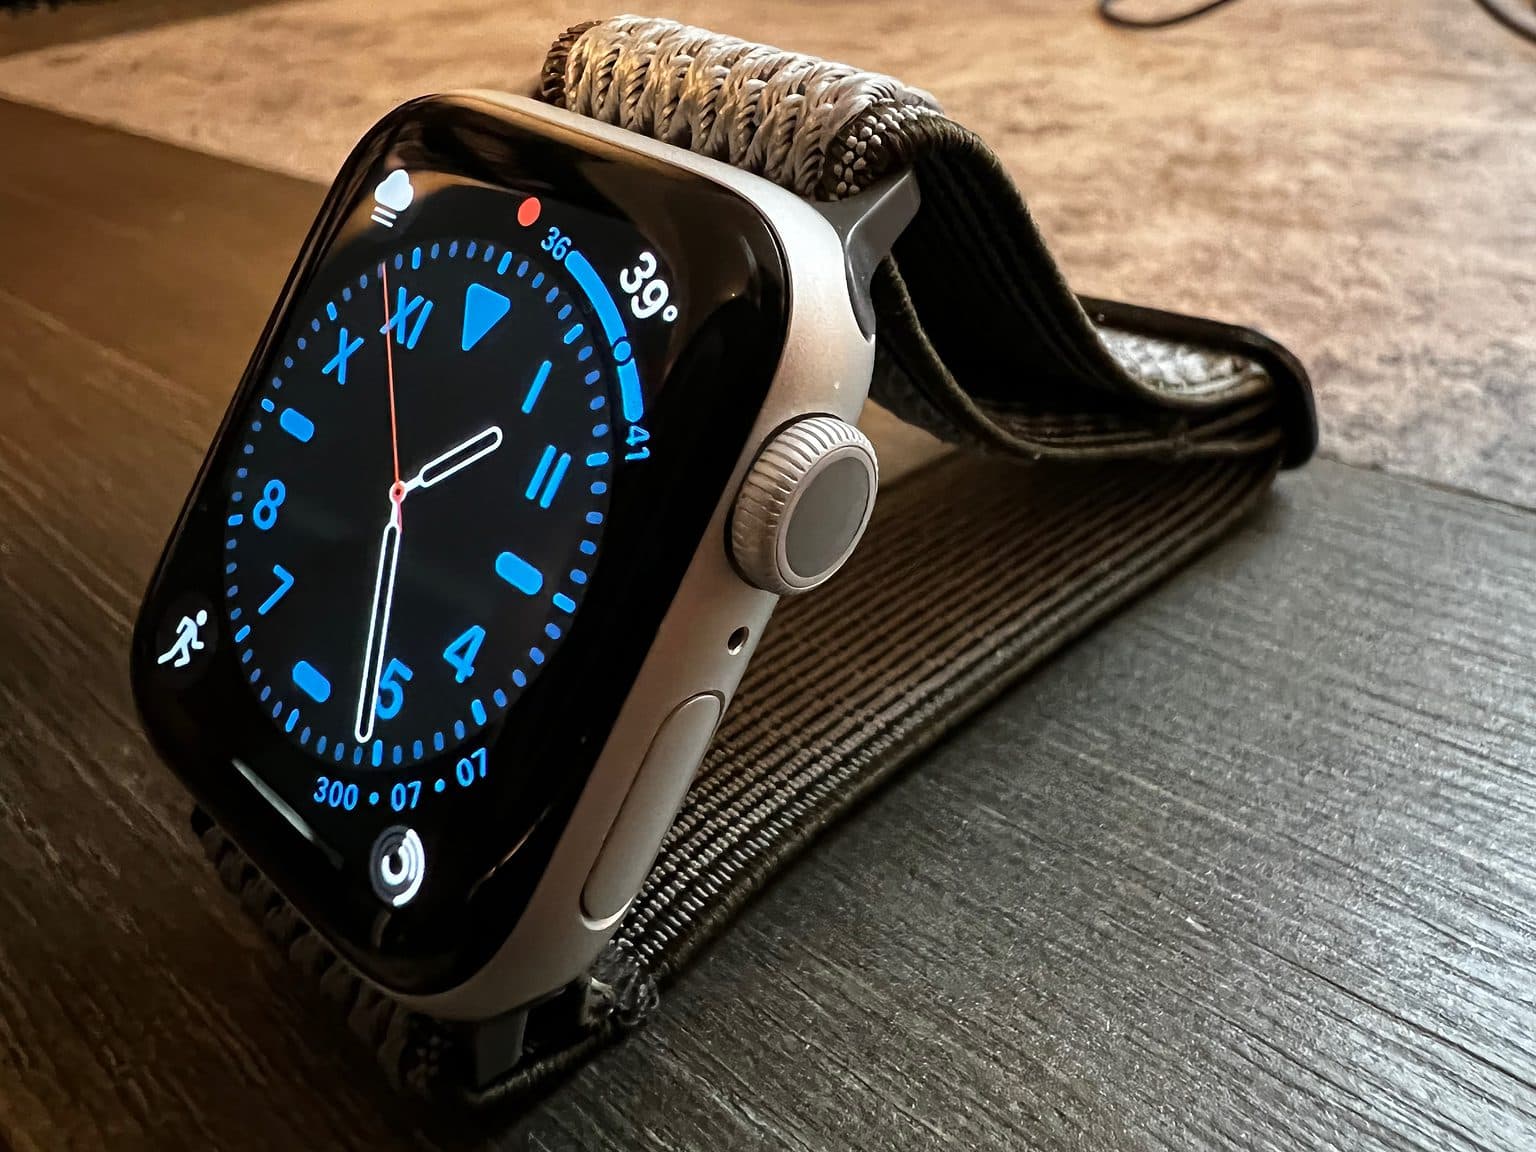 Apple Watch 6 was the first model to include the pulse oximetry sensor.